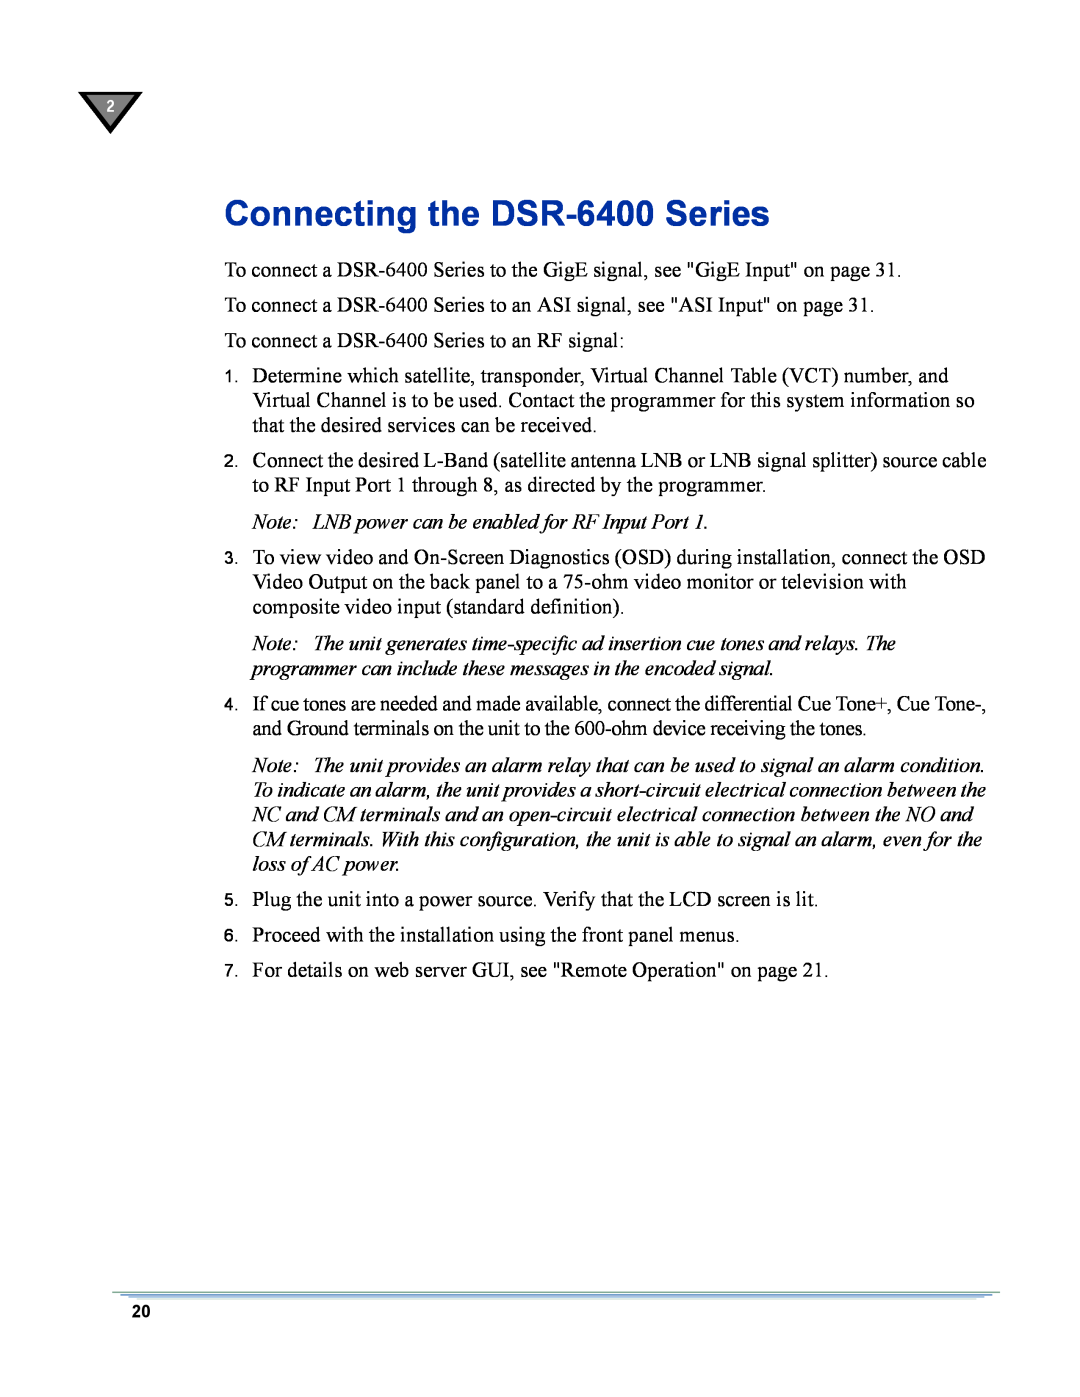 Motorola manual Connecting the DSR-6400Series, Note LNB power can be enabled for RF Input Port 